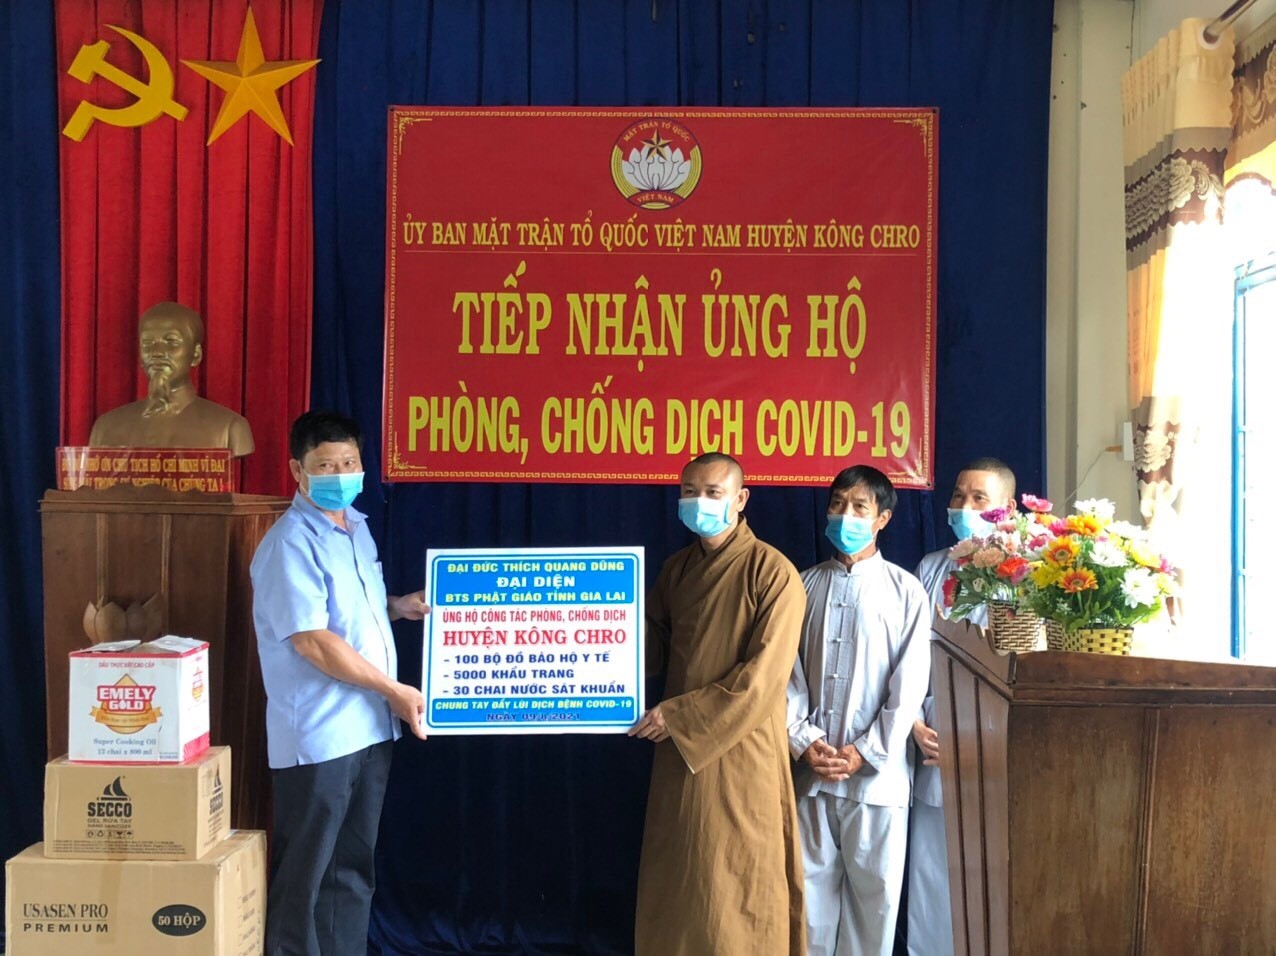 VBS in Gia Lai sent support supplies to anti-epidemic frontline